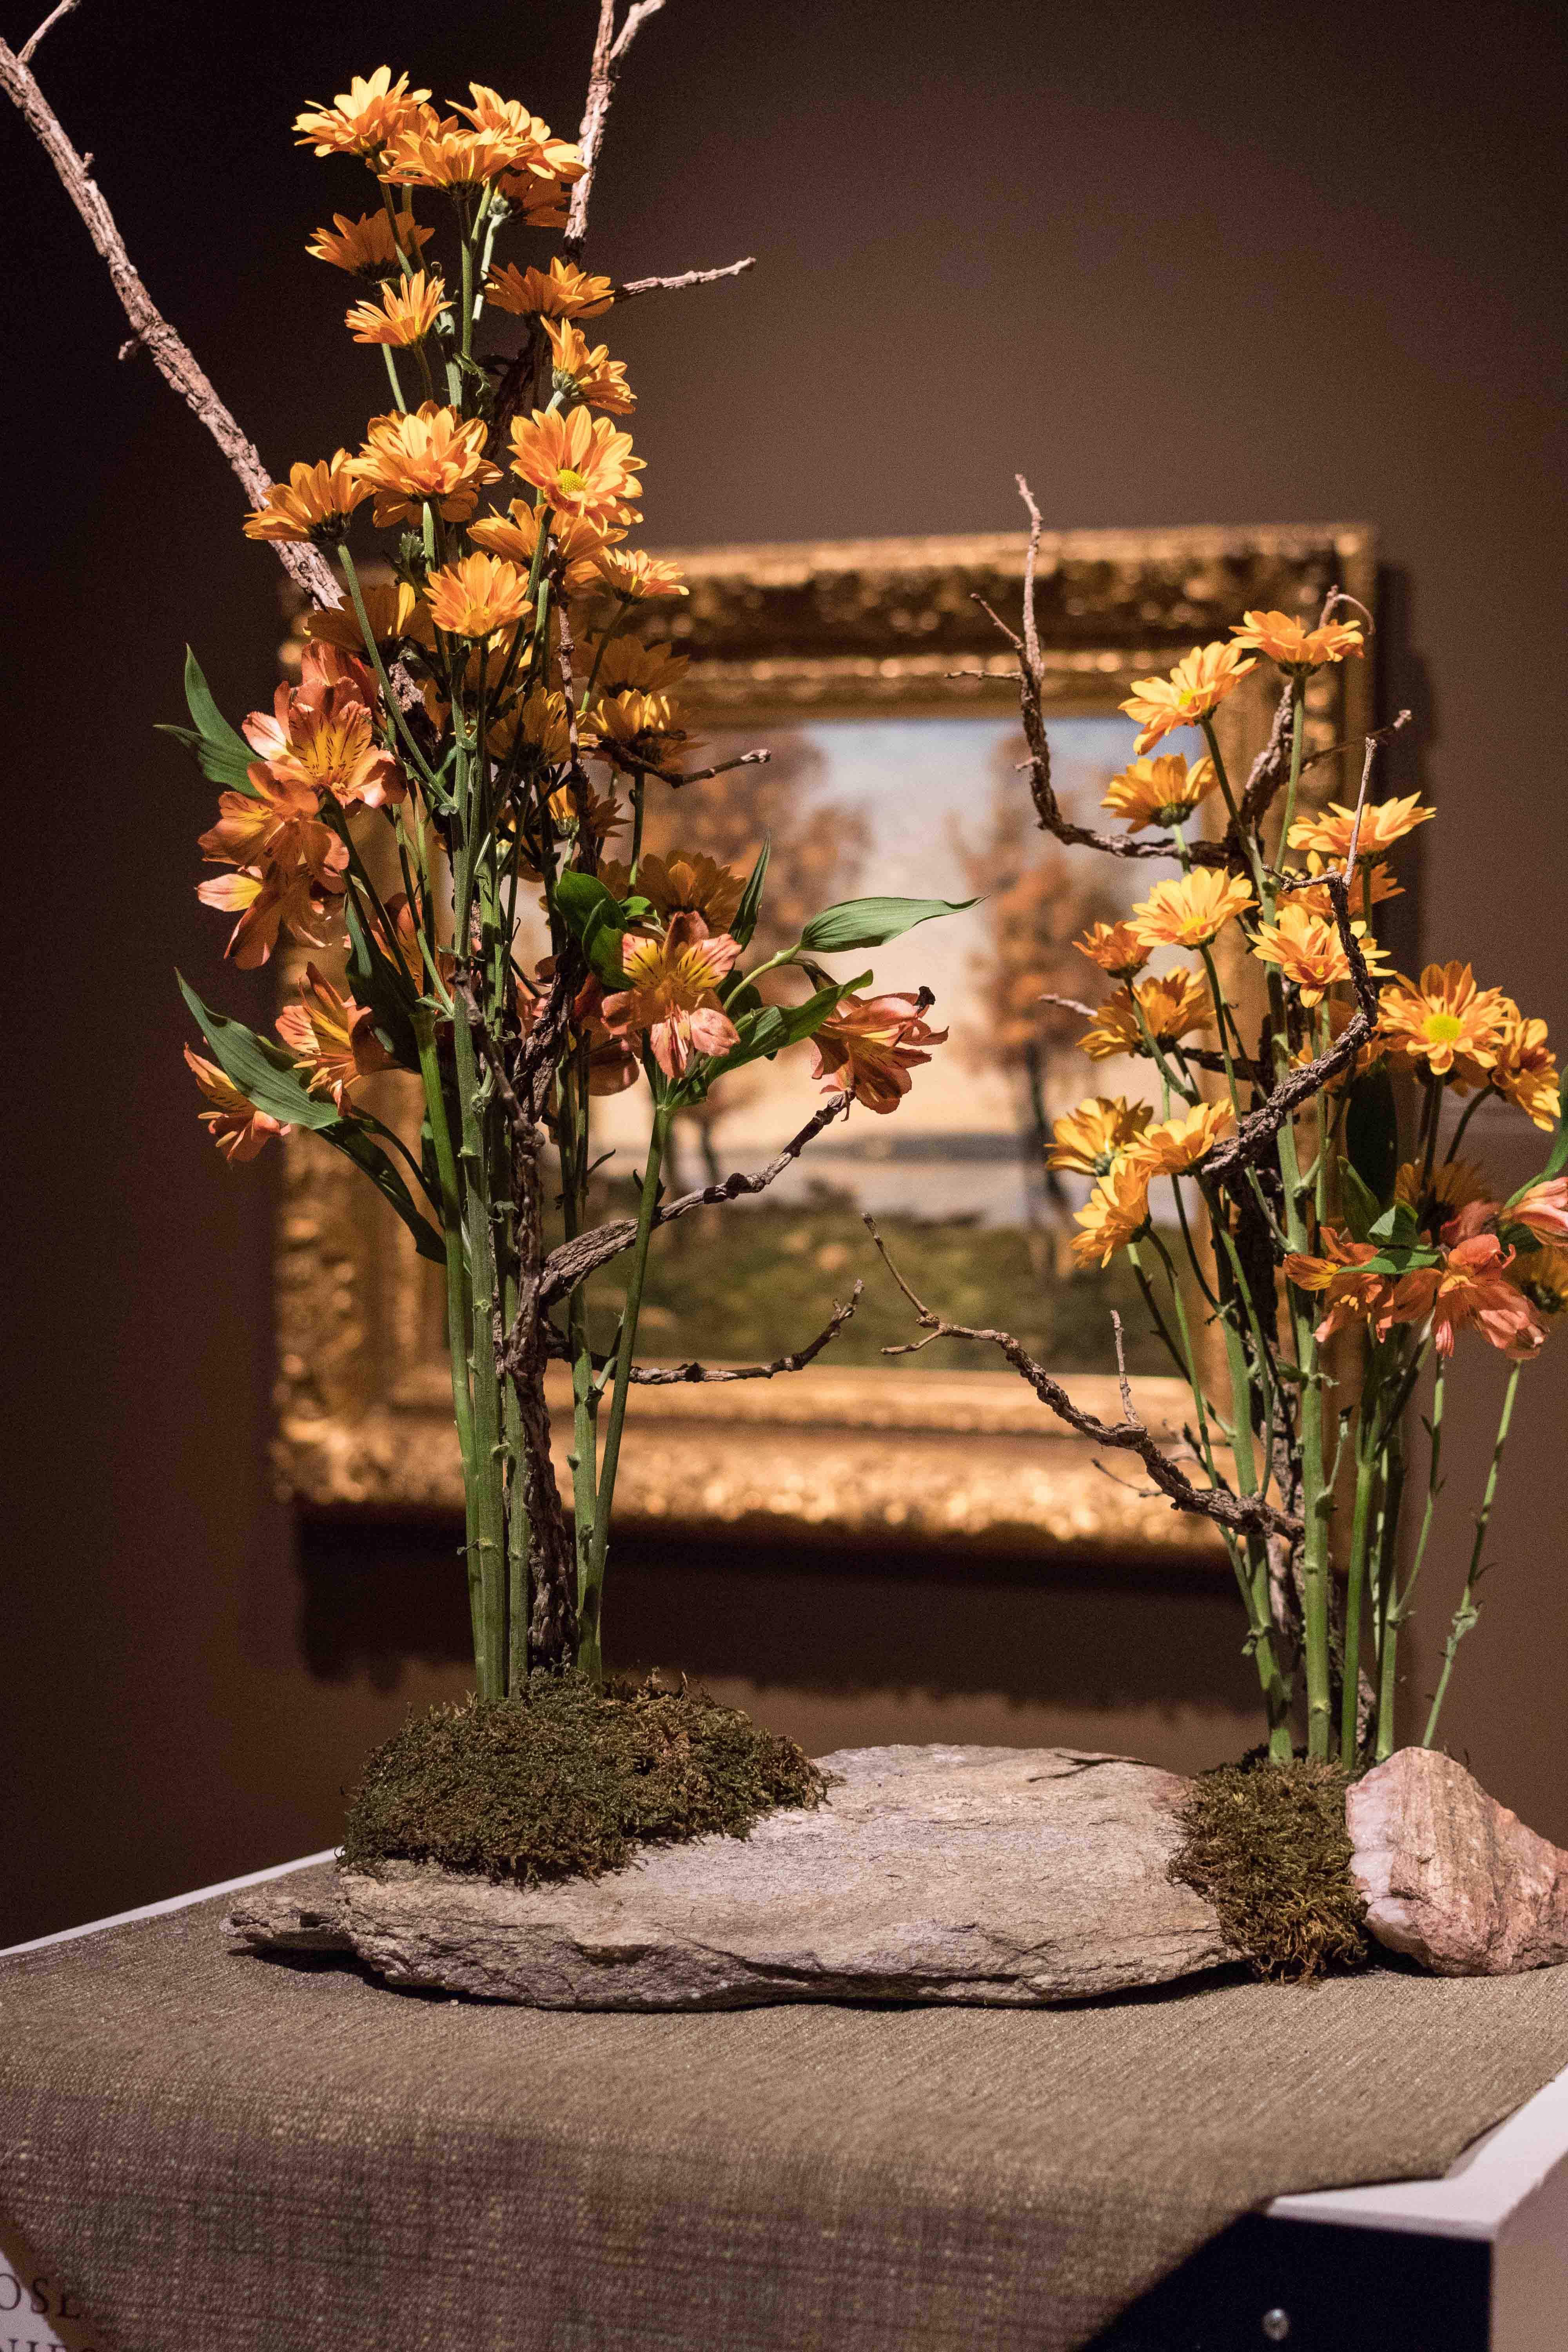 Art in Bloom 2018 at the Milwaukee Art Museum | https://www.roseclearfield.com